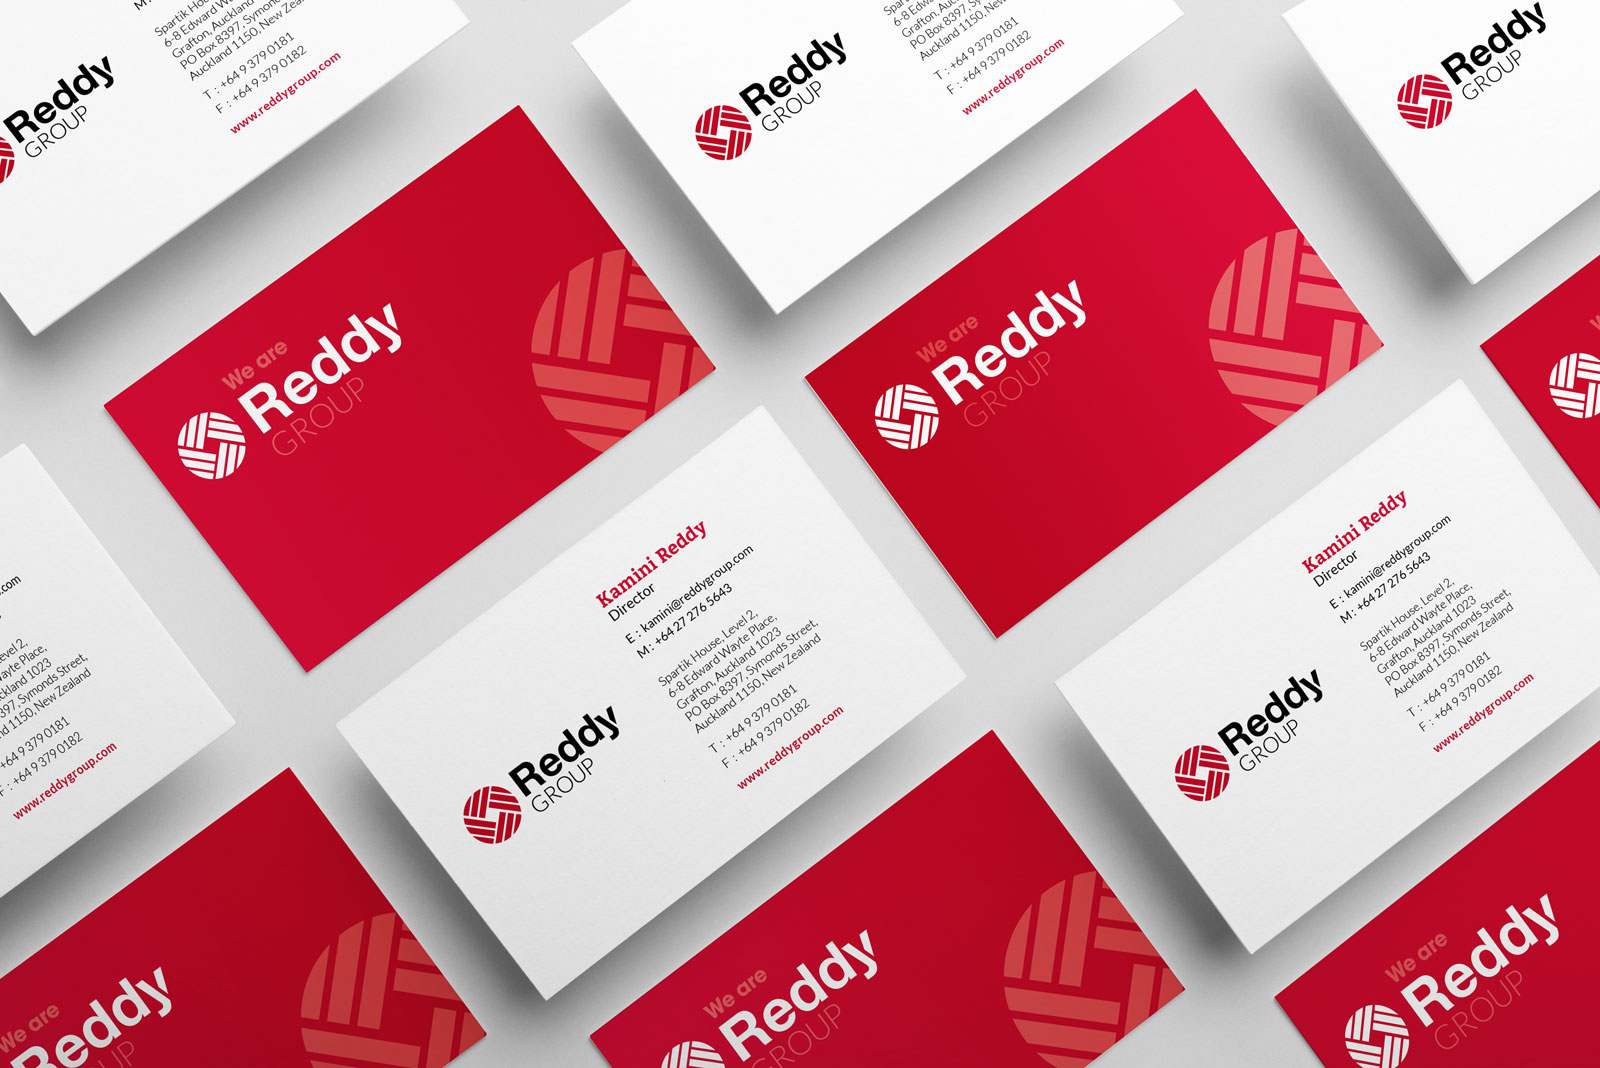 Reddy_group_business_cards_branding_design_digital_marketing_visual_communications_graphic_design_agency_redfire